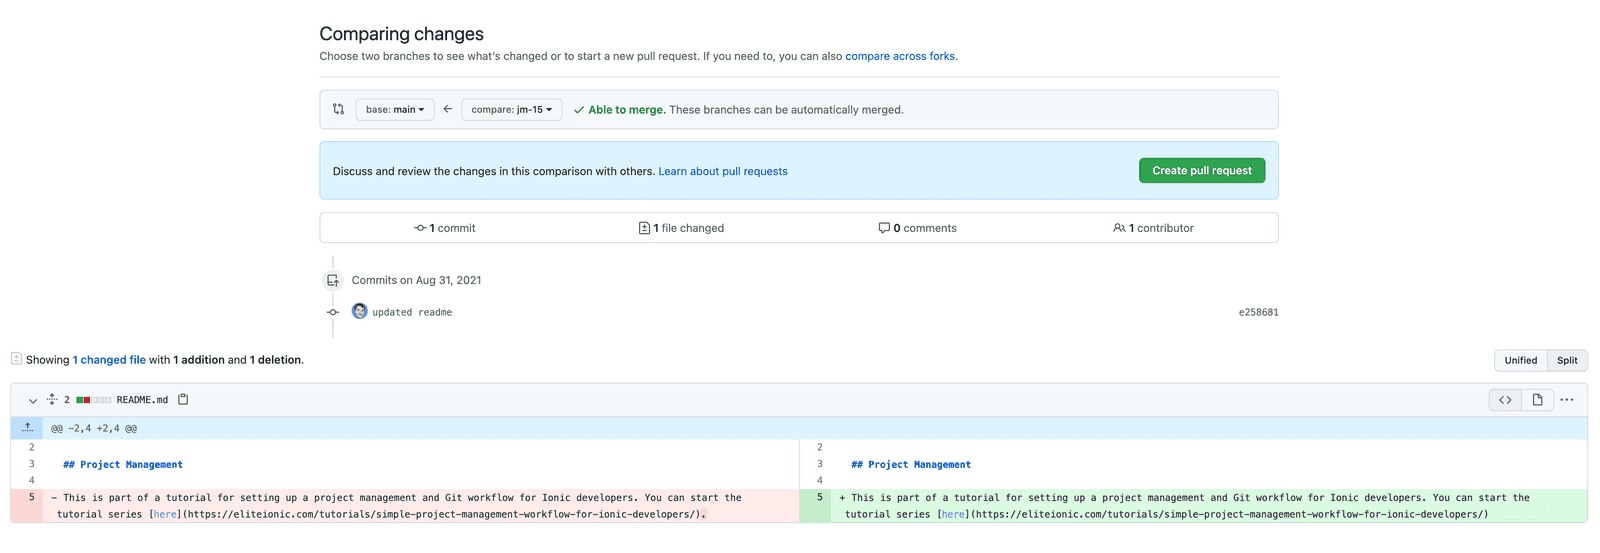 Creating a pull request in Github